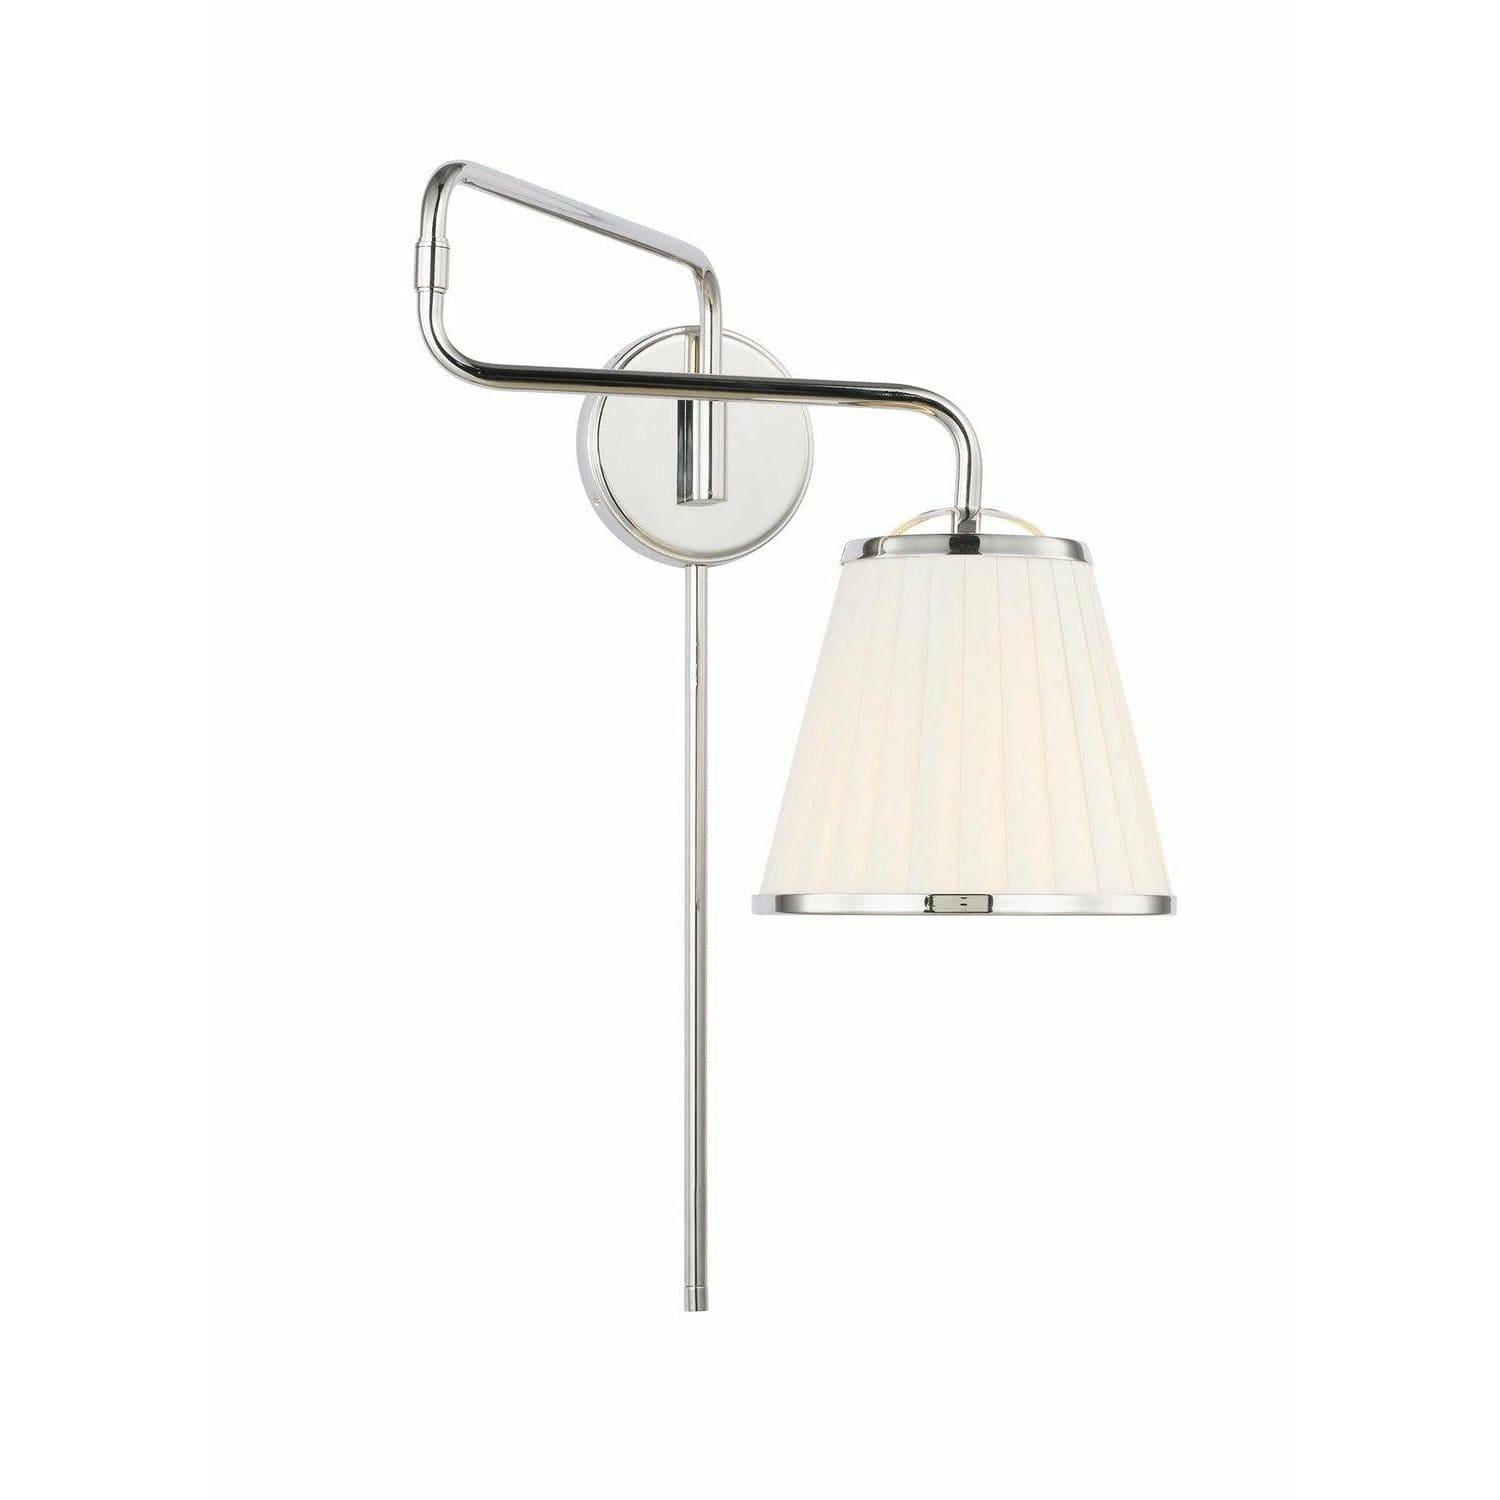 Visual Comfort Studio Collection - Esther Swing Arm Wall Sconce - LW1081PN | Montreal Lighting & Hardware